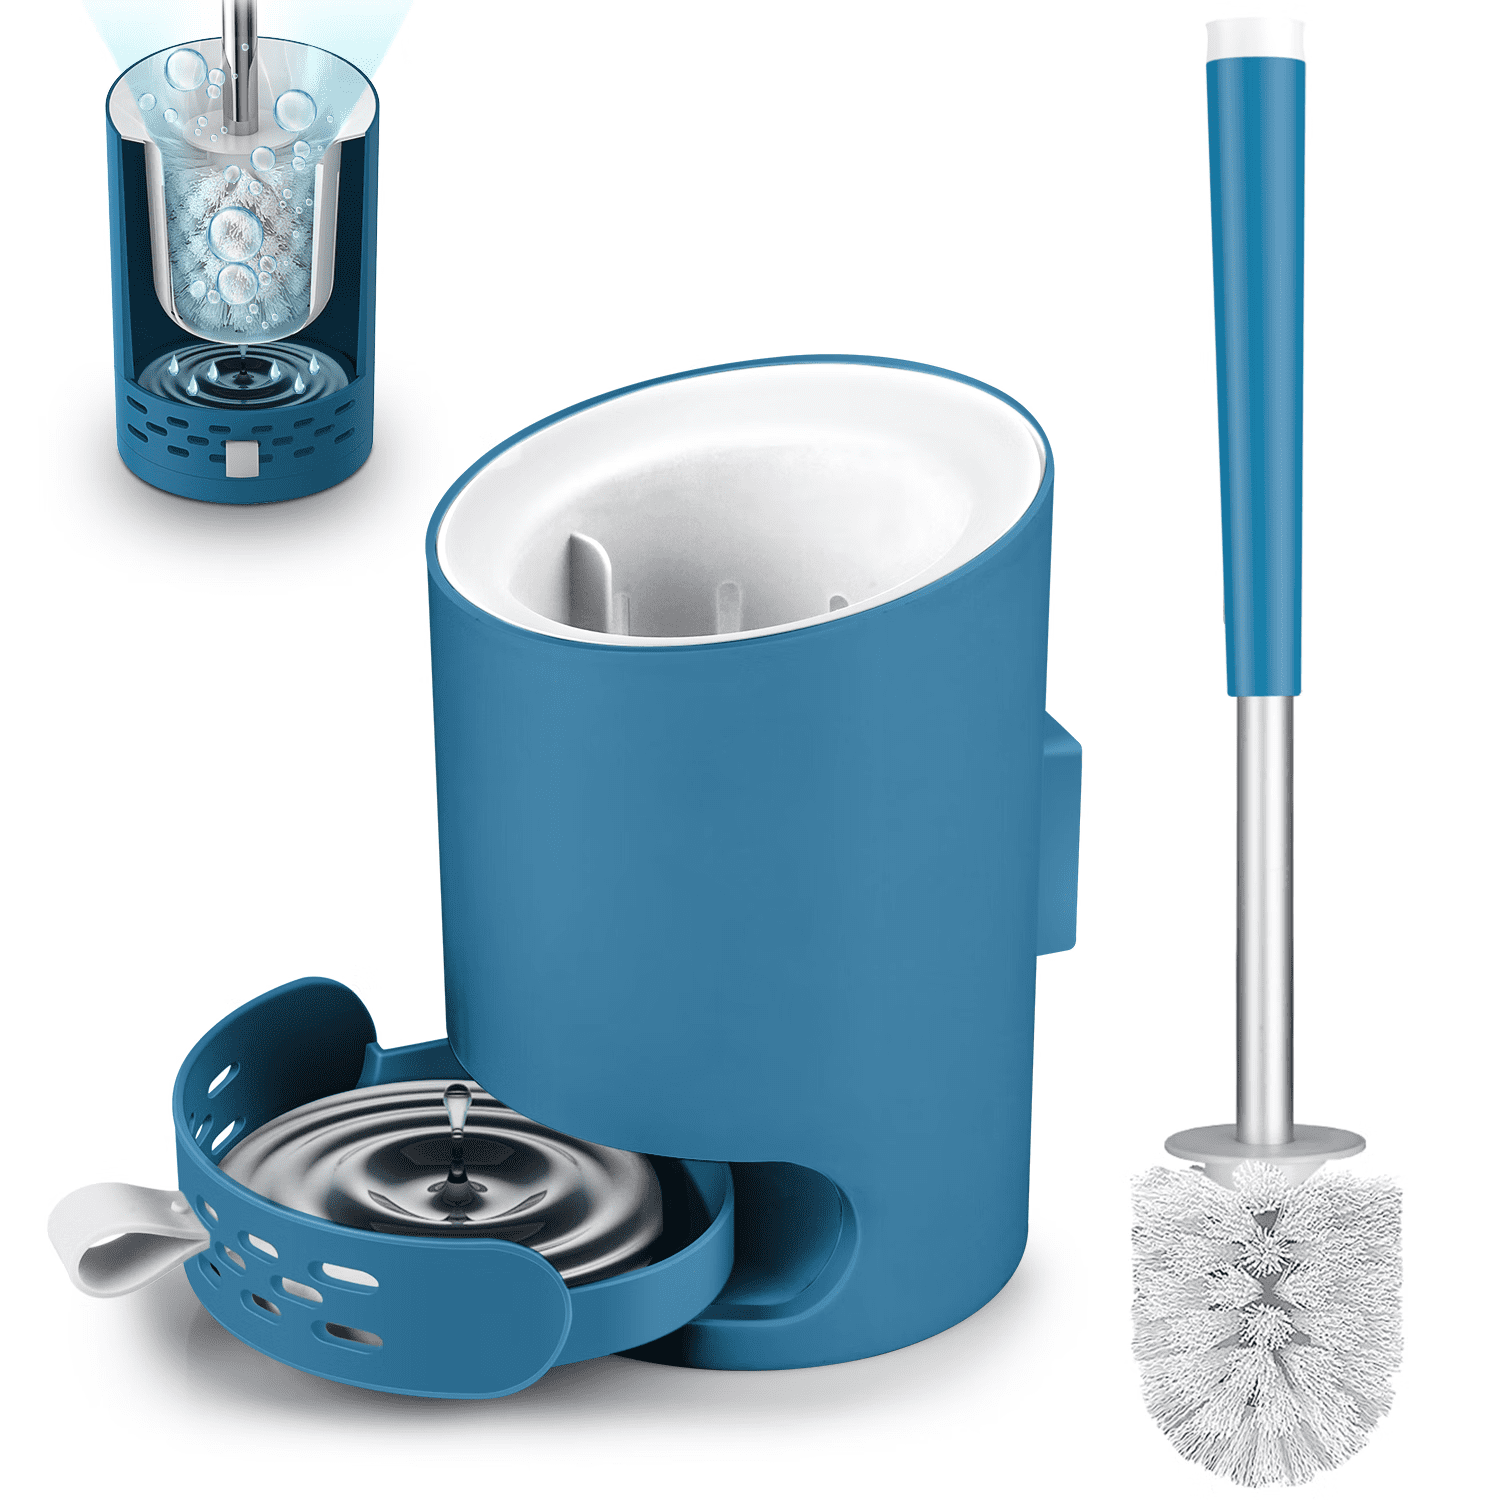 Bcooss Toilet Brush and Holder Set, Bathroom Toilet Bowl Brush and Caddy Cleaner Anti Slip with Sturdy Soft Silicone Bristle Removable Water Drawer